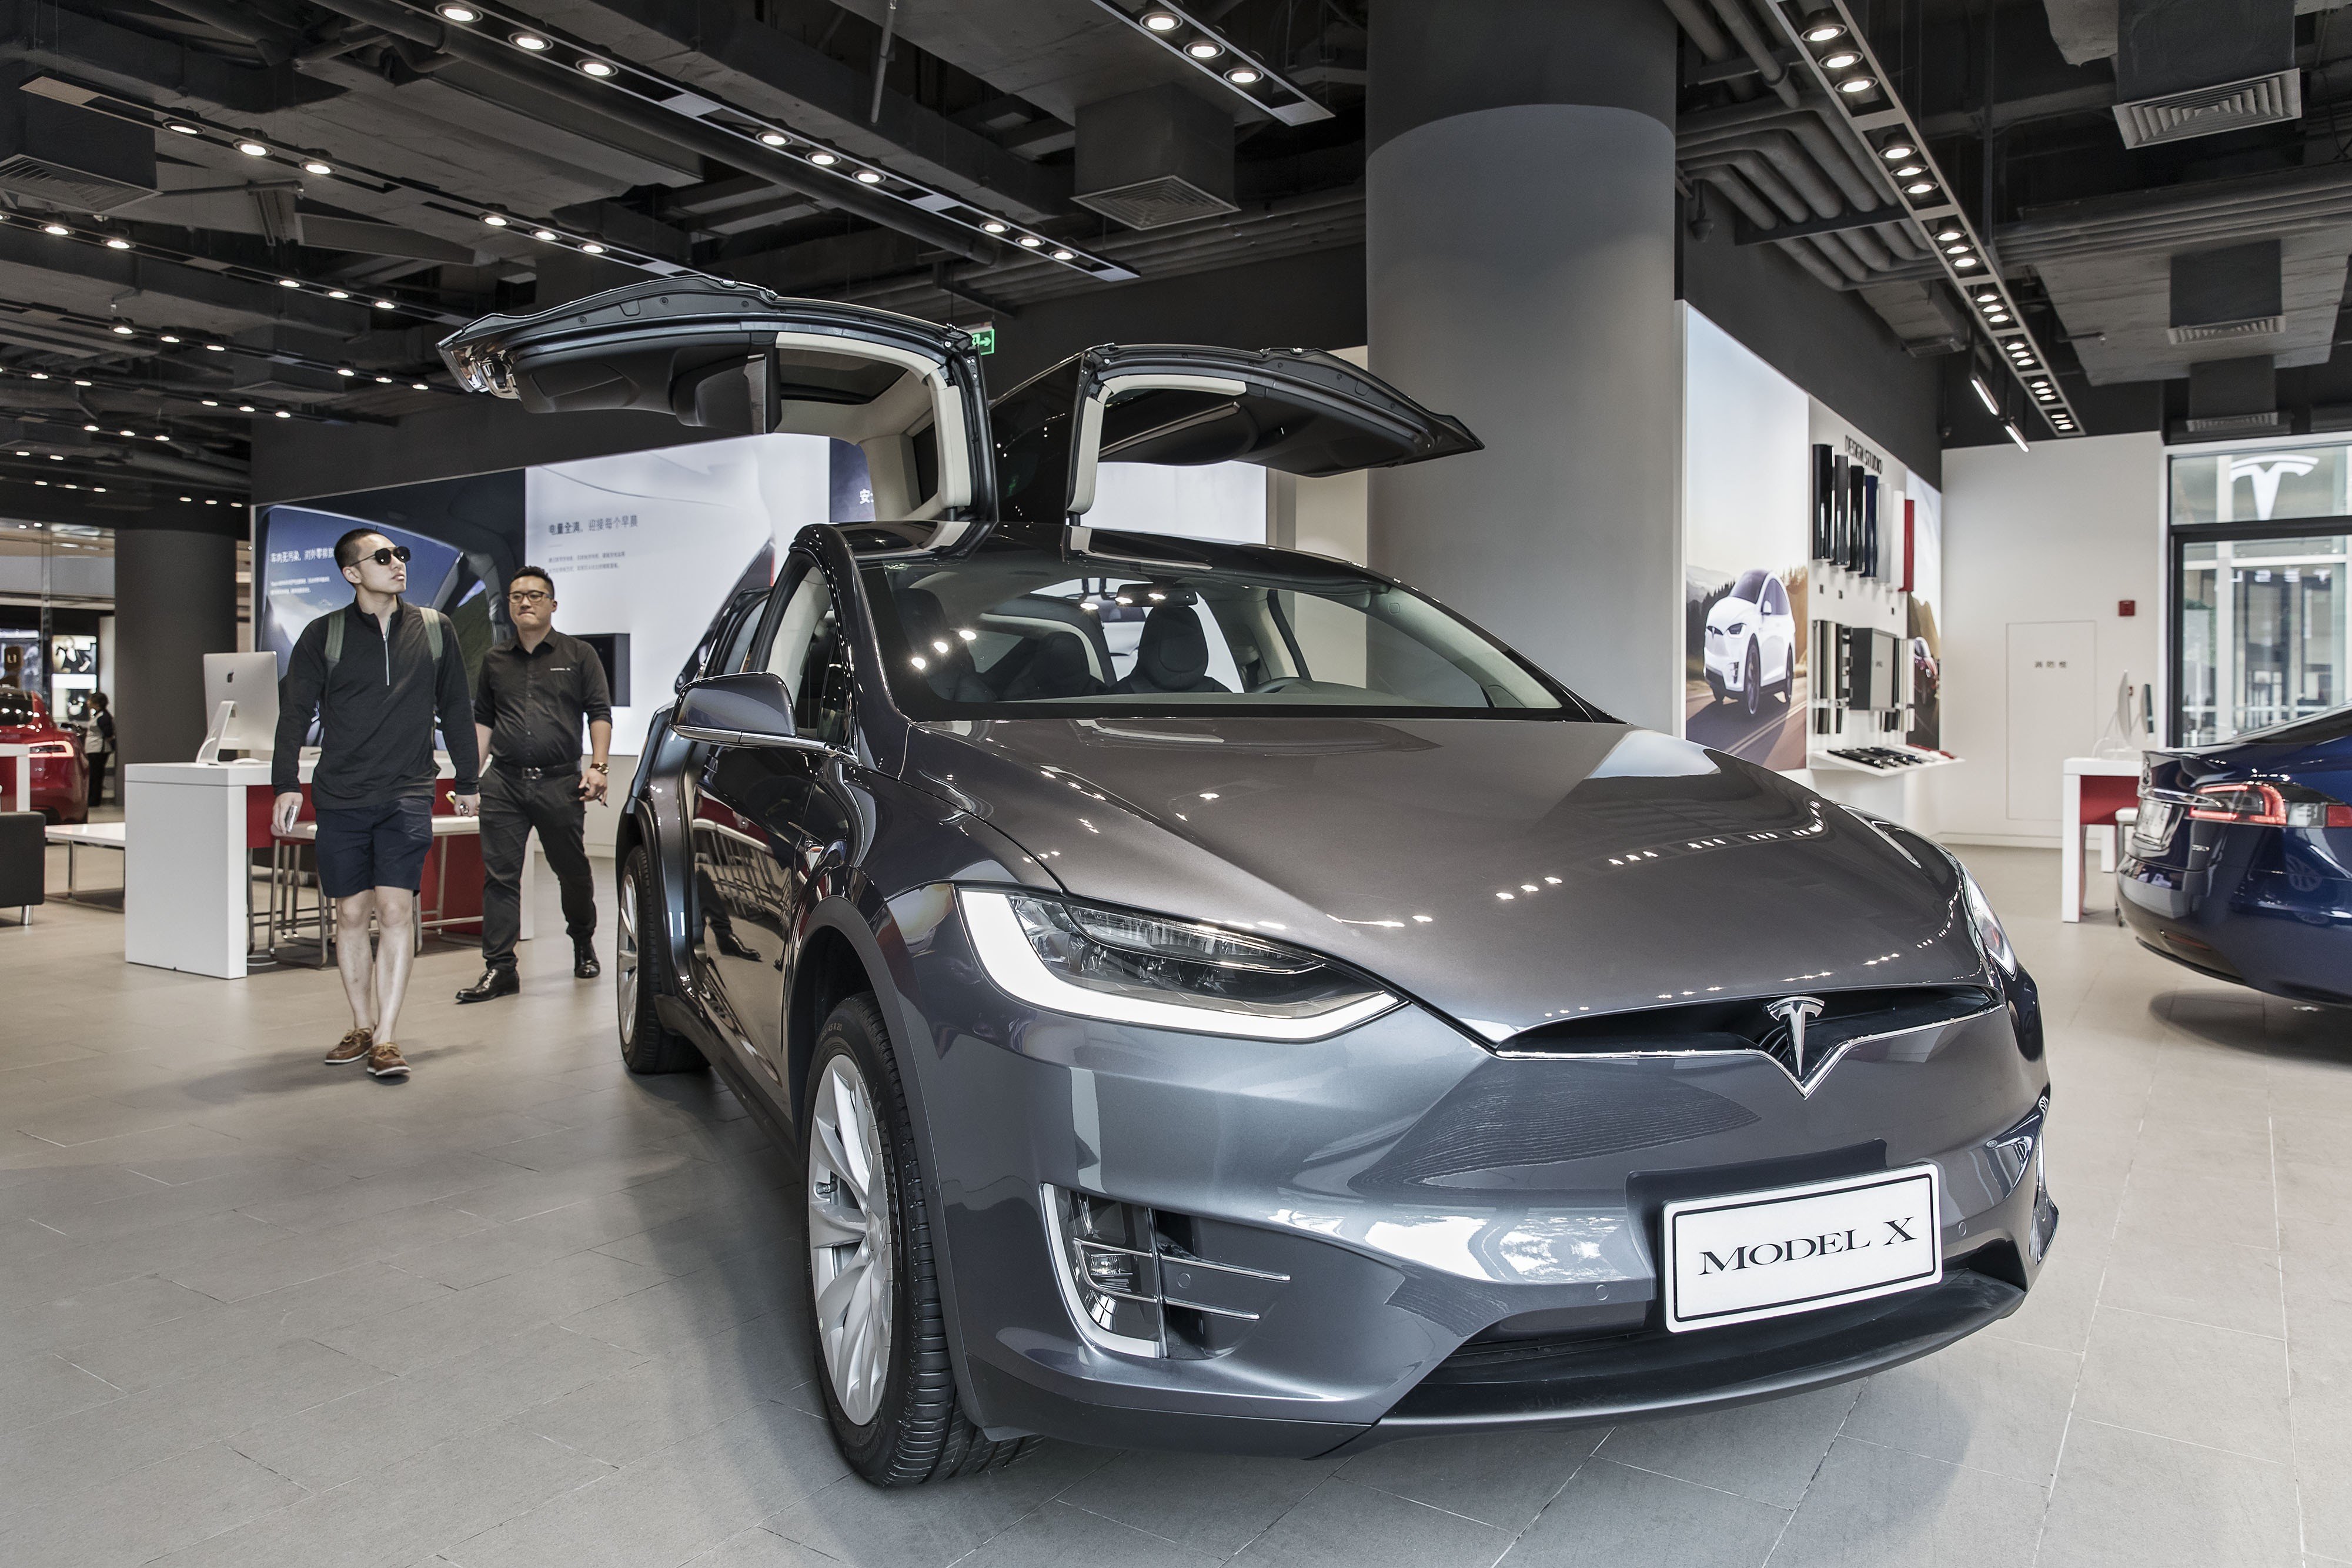 Krachtcel Wijde selectie Marxisme Tesla recalls 11,000 Model X SUVs worldwide because of safety risk posed by  faulty rear seats | South China Morning Post